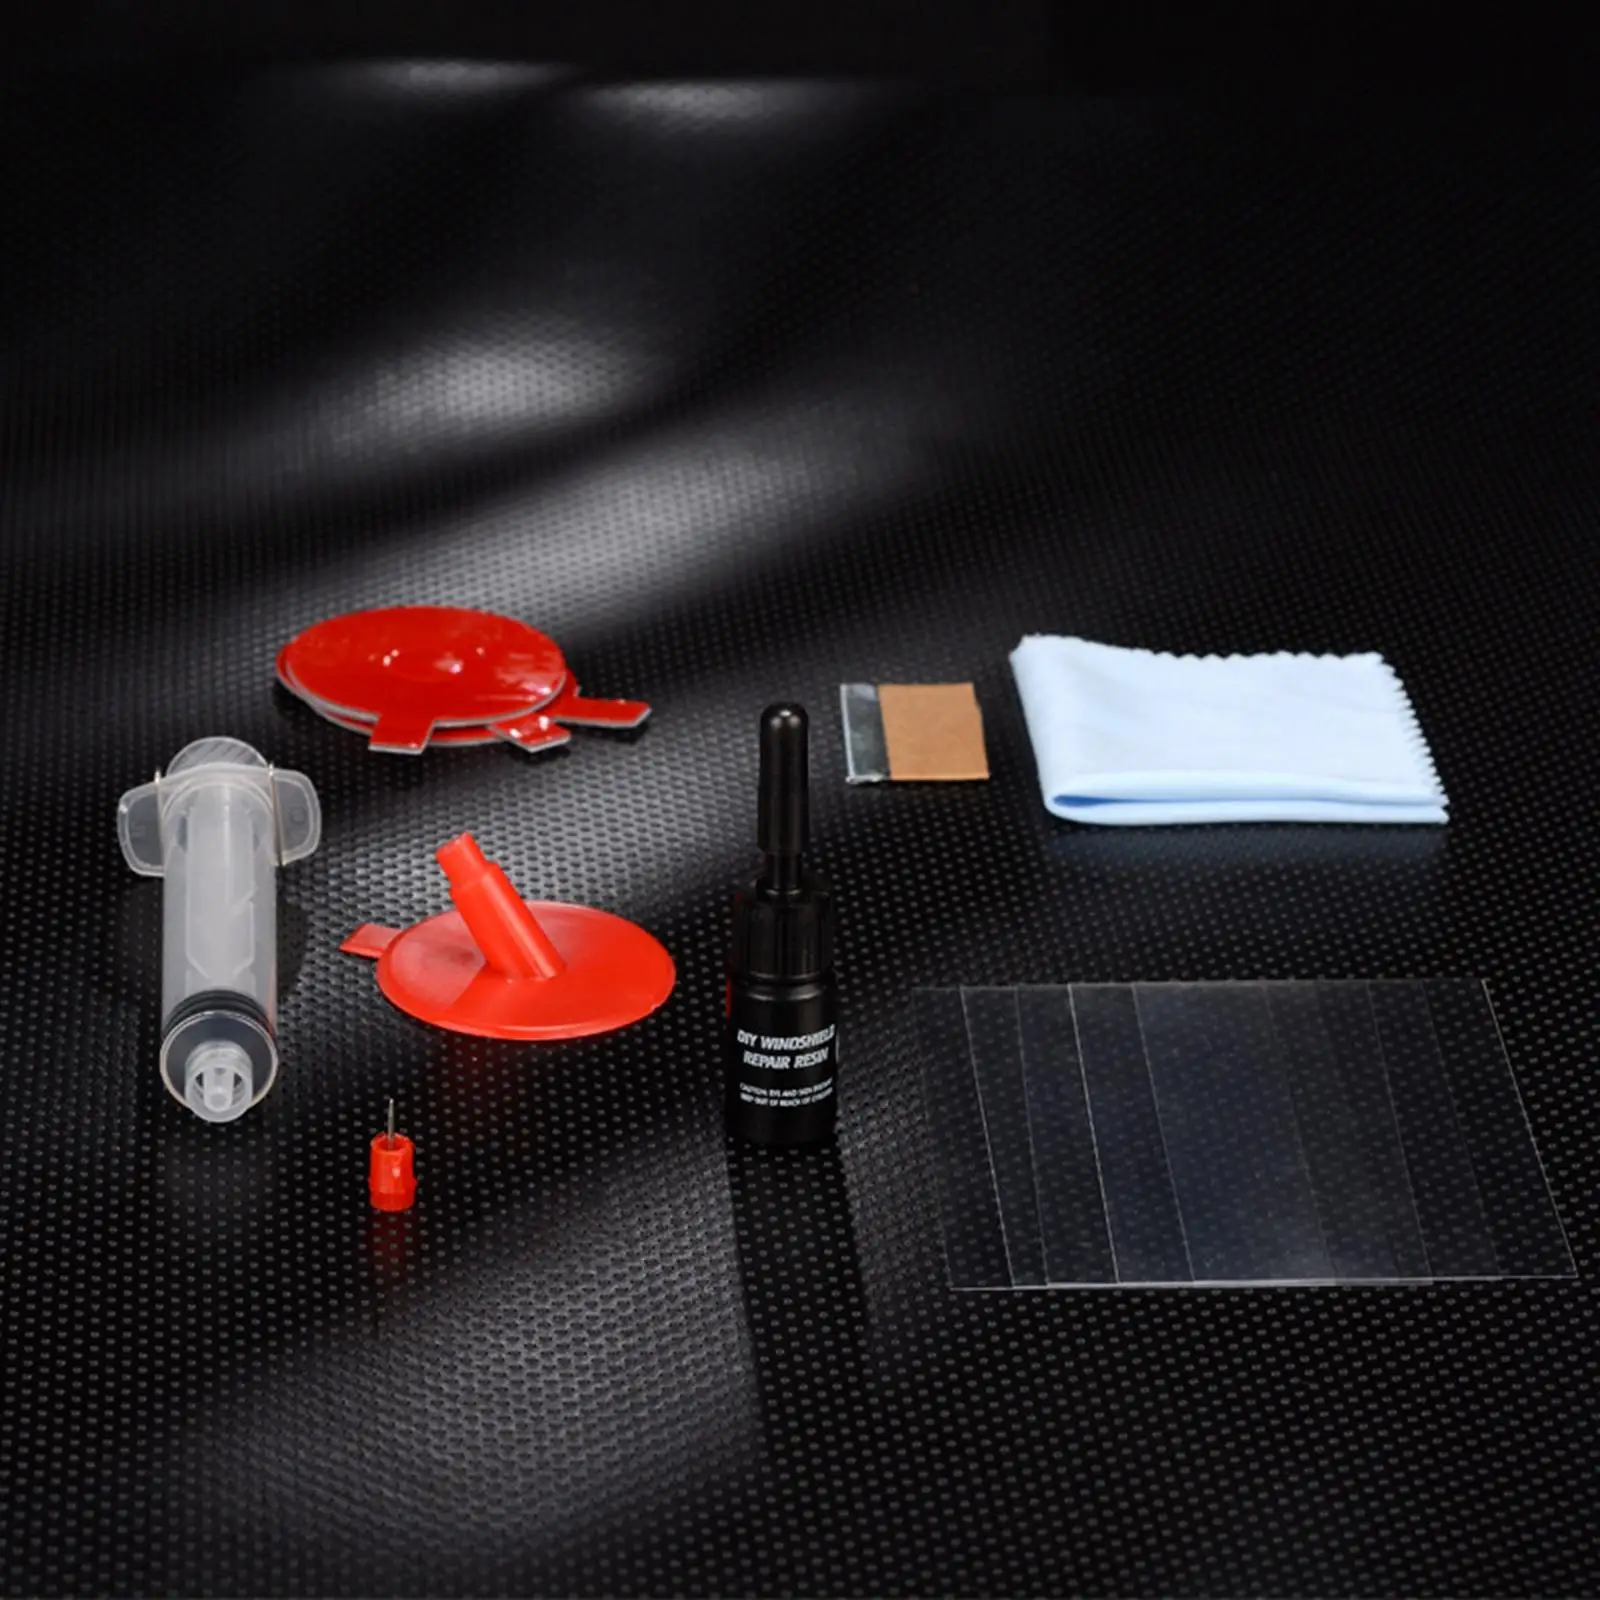 Car Windshield Repair Kit Auto Glass Windshield Repair Set Tools for Star Shaped Damage moon Cracks Fixing Chips